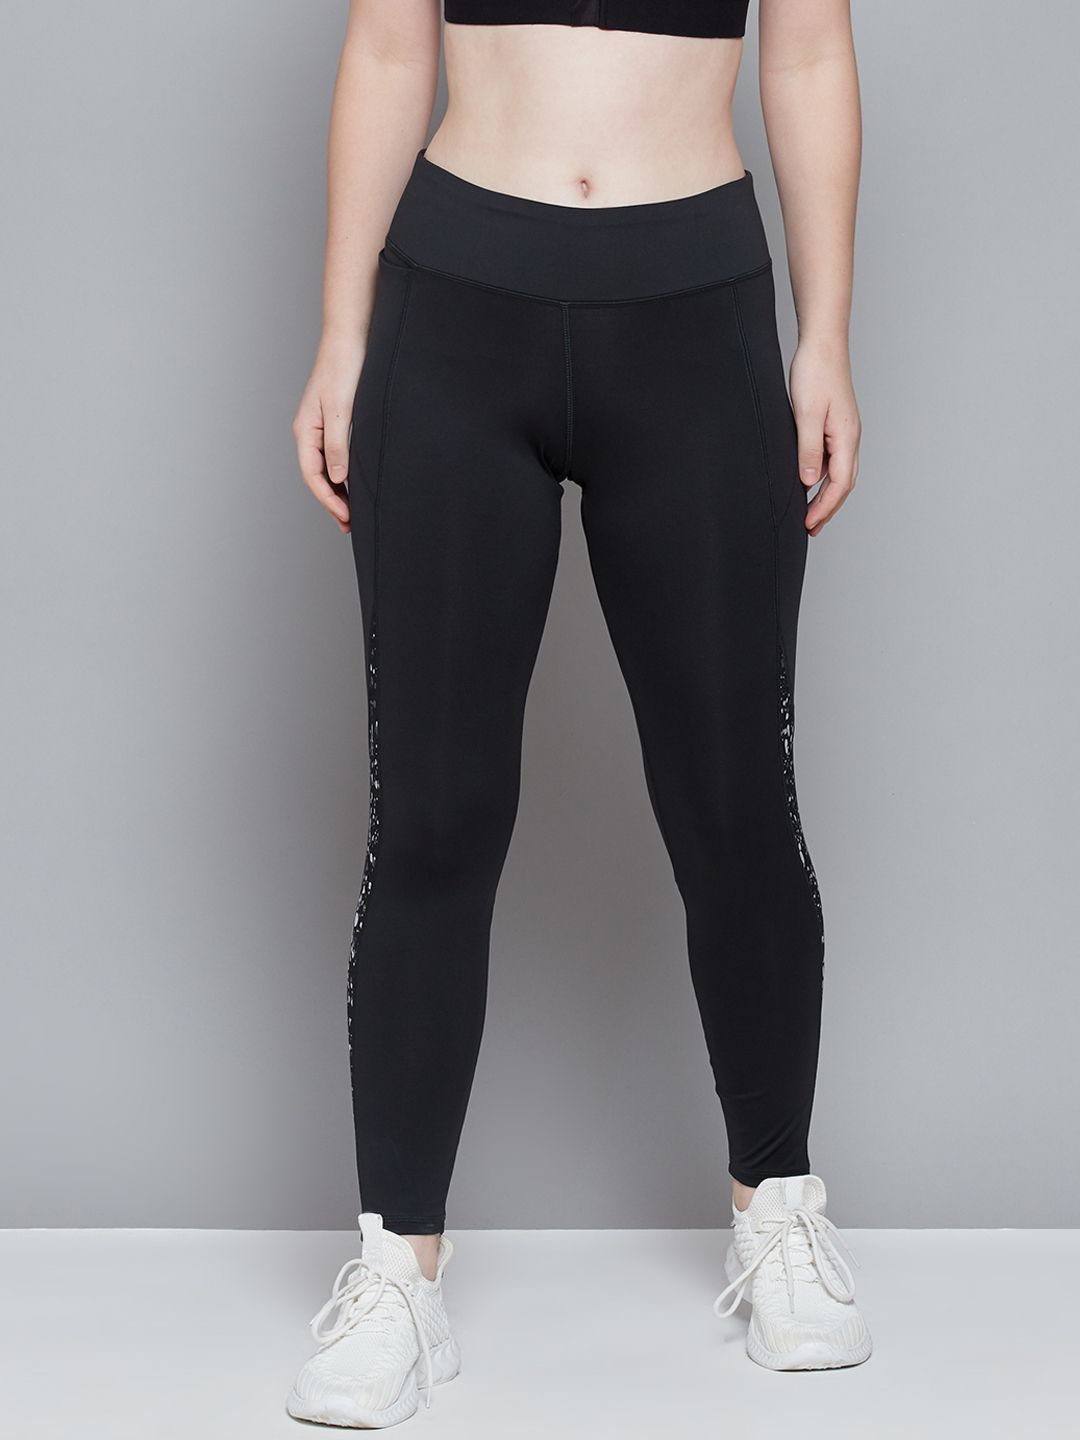 Reebok Women Black Printed Fitted Speedwick Workout Running Tights Price in India